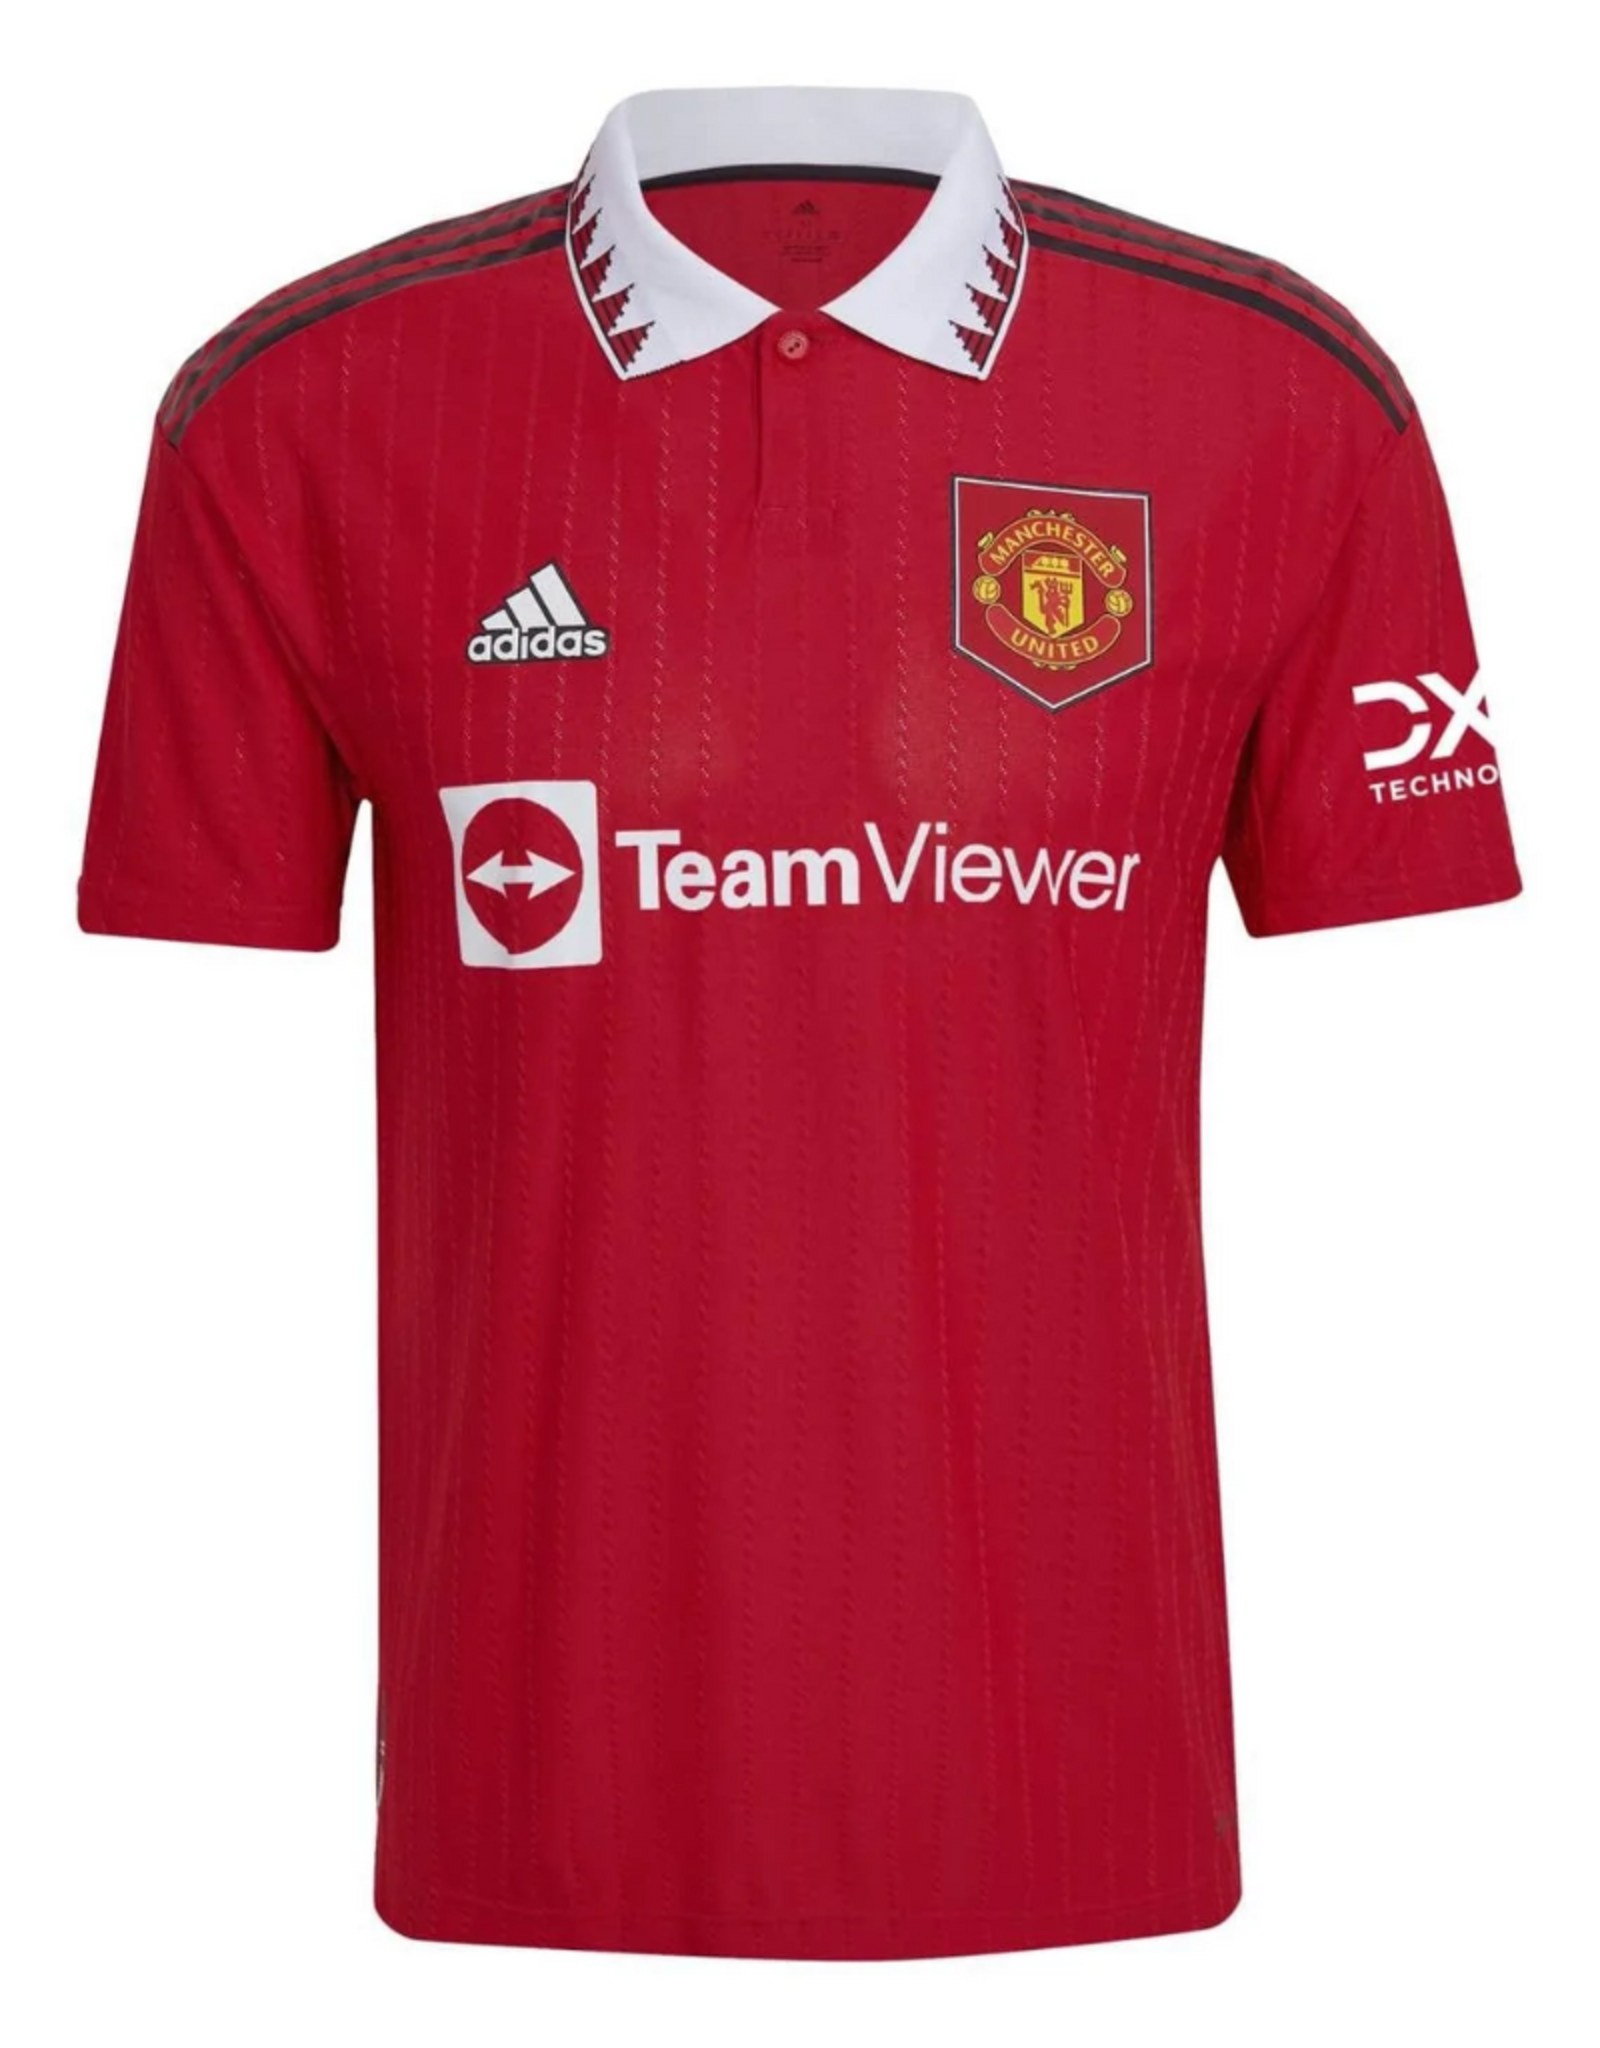 Adidas Adidas Men's '22 Soccer Jersey Manchester United Red